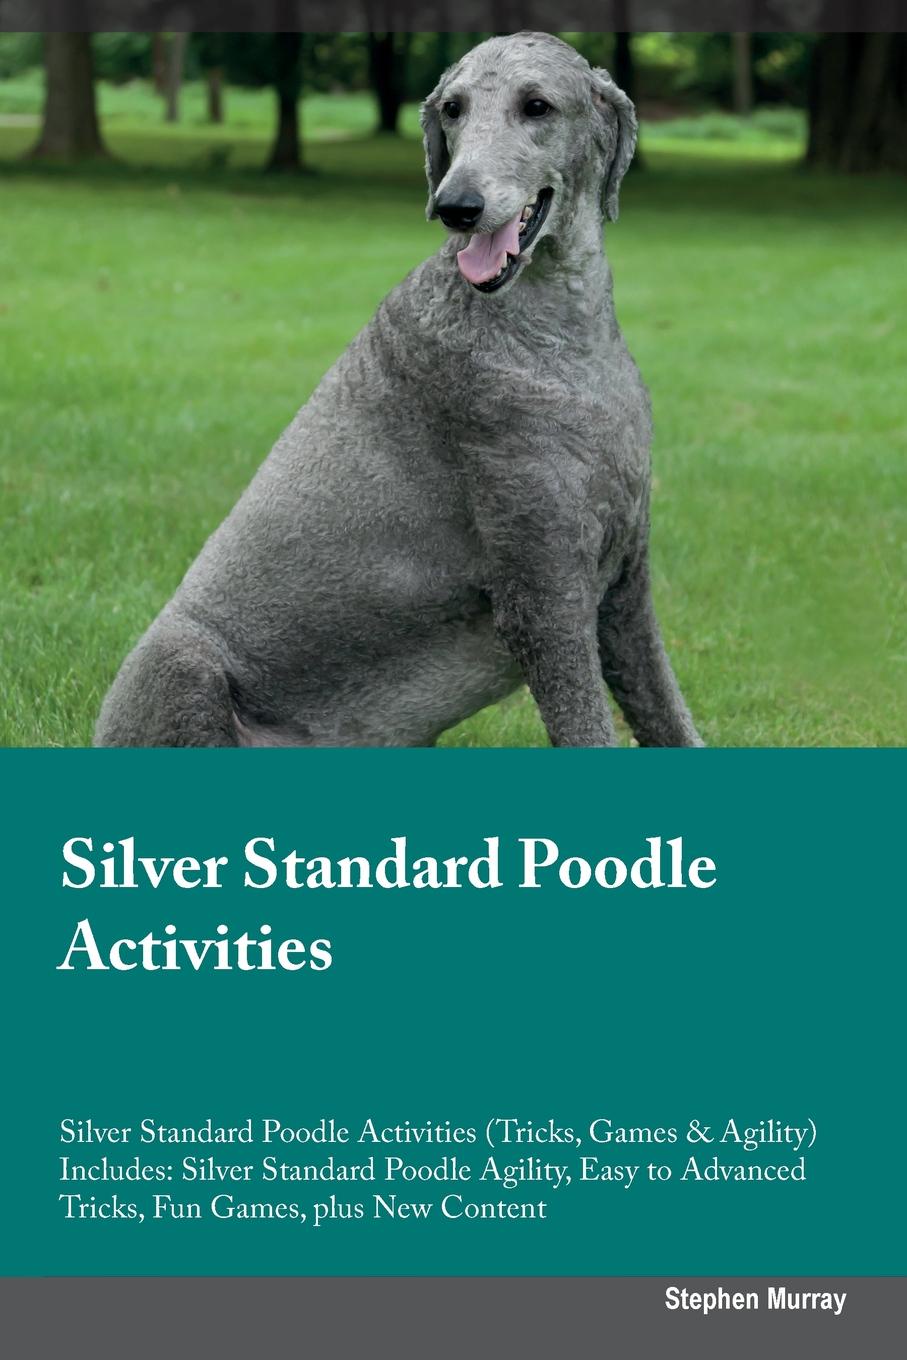 Silver Standard Poodle Activities Silver Standard Poodle Activities (Tricks, Games & Agility) Includes. Silver Standard Poodle Agility, Easy to Advanced Tricks, Fun Games, plus New Content